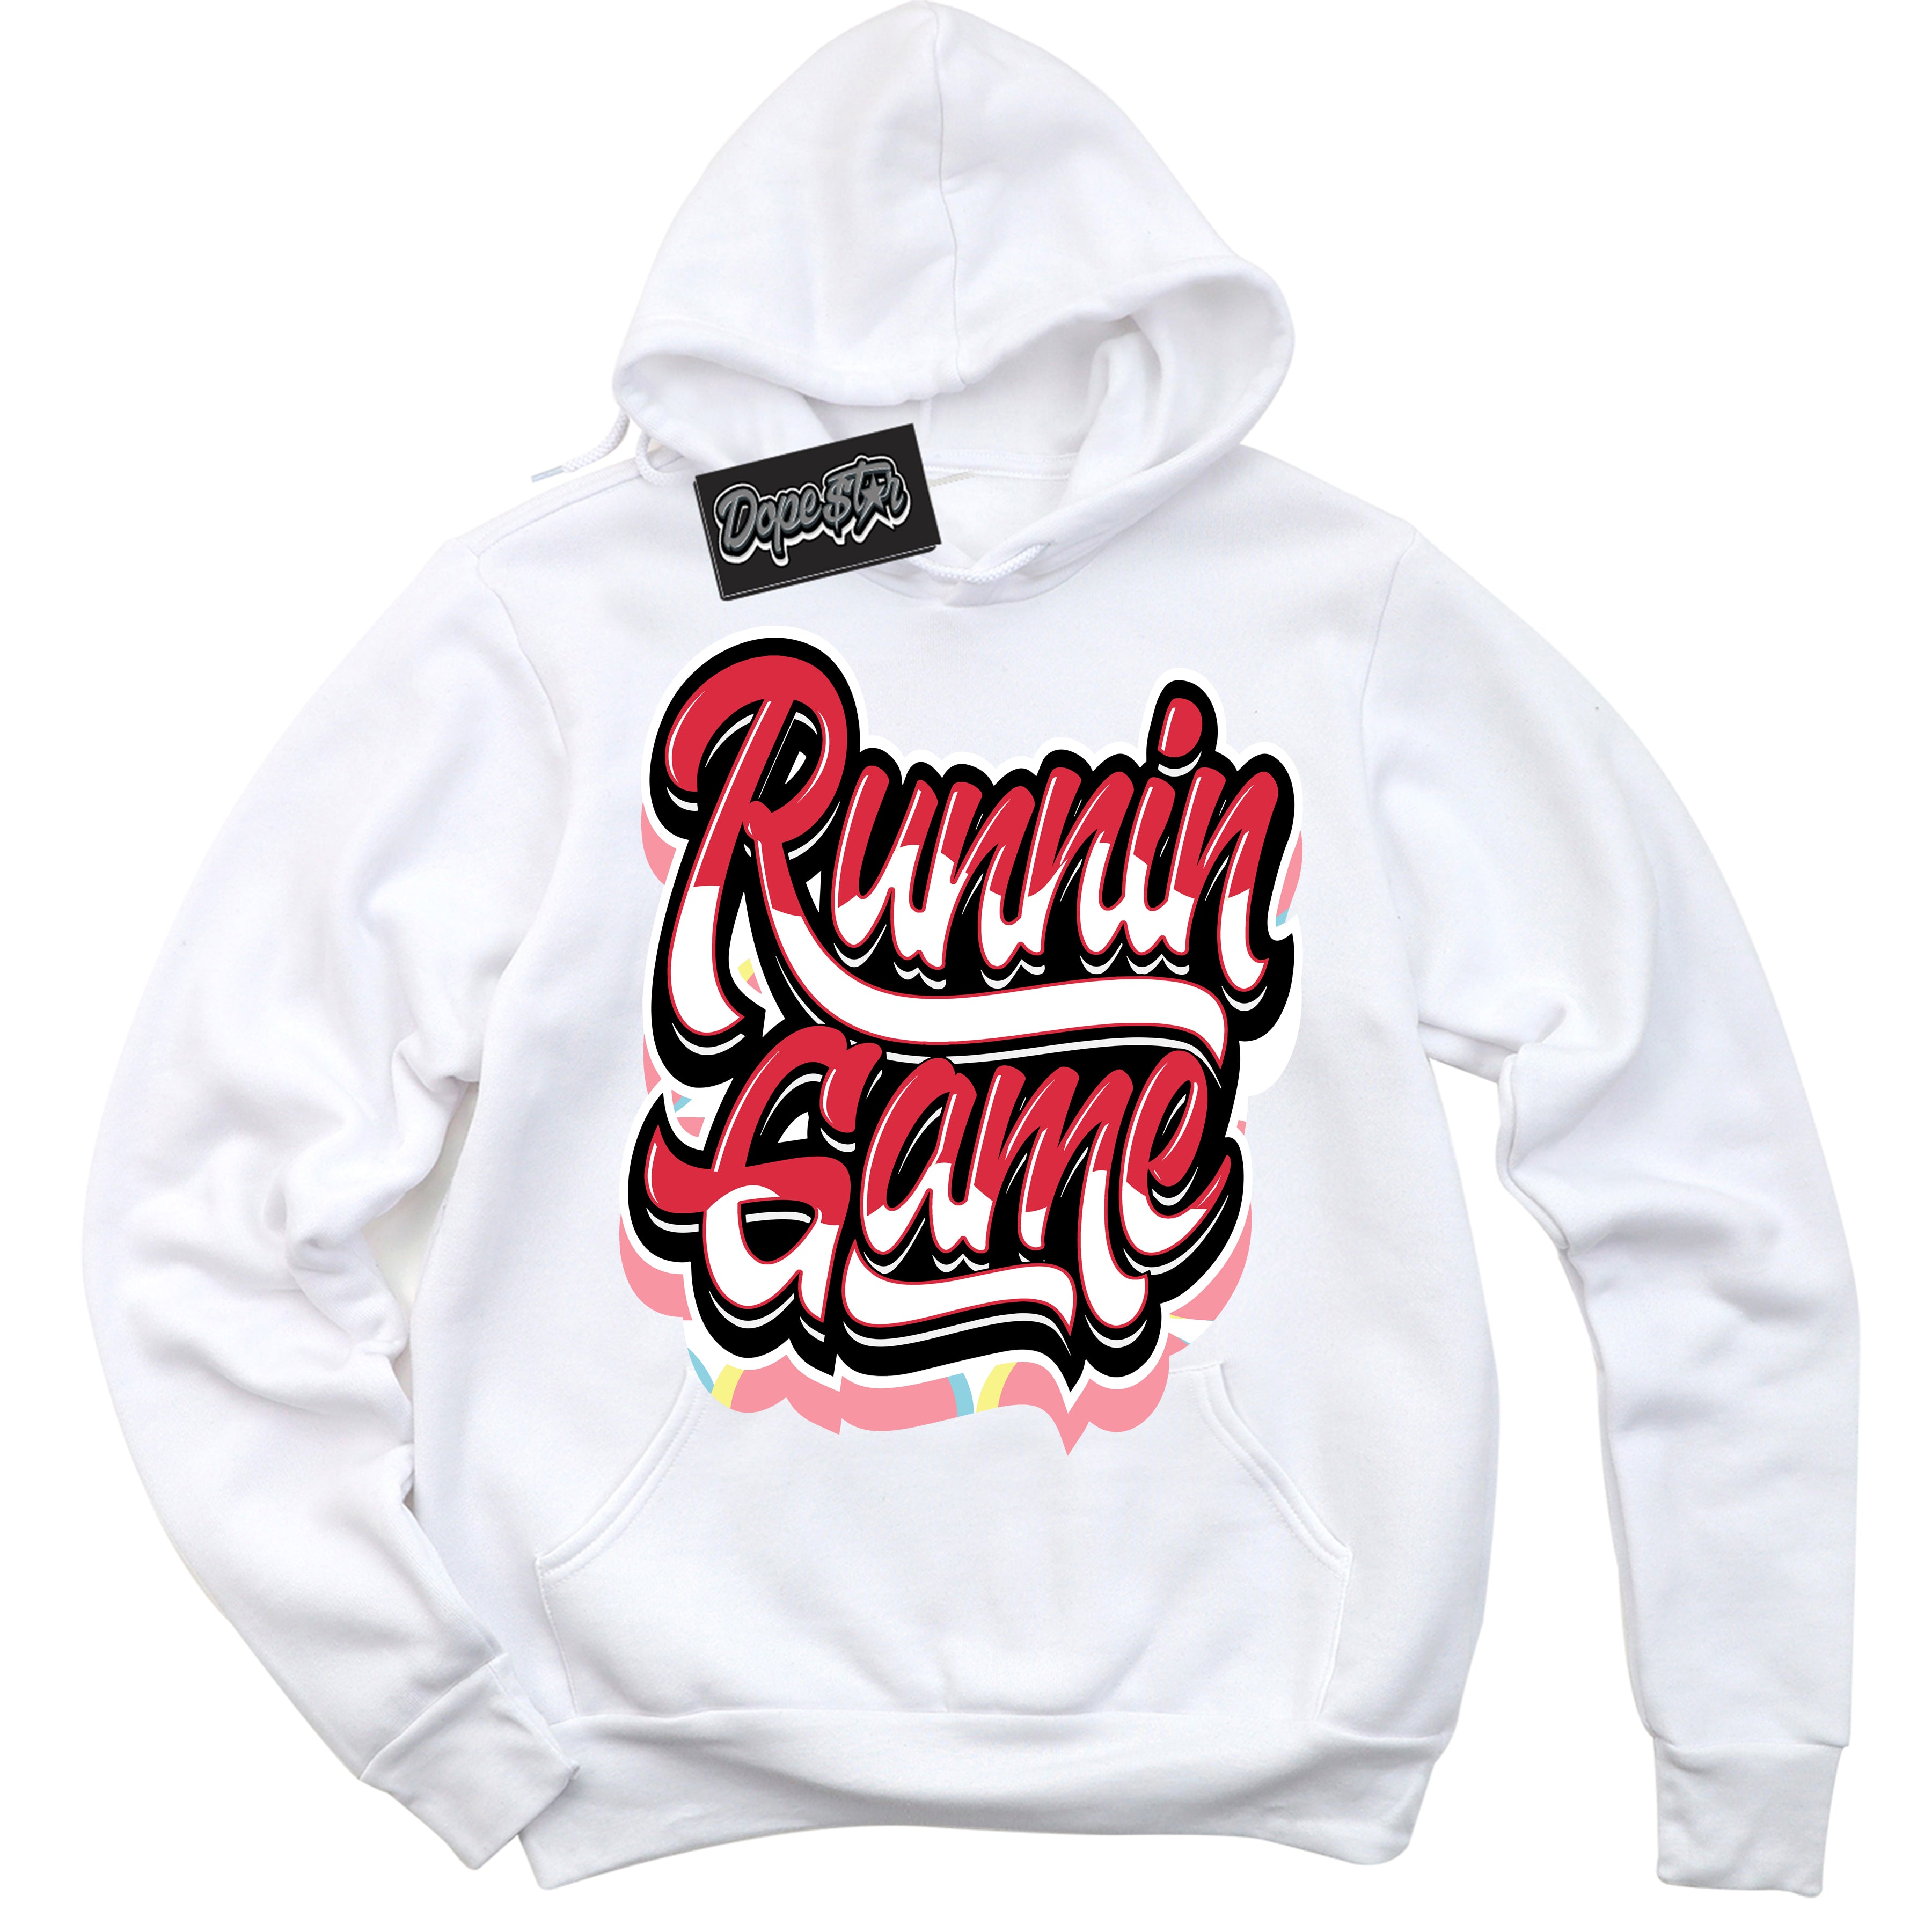 Cool White Graphic DopeStar Hoodie with “ Running Game “ print, that perfectly matches Spider-Verse 1s sneakers